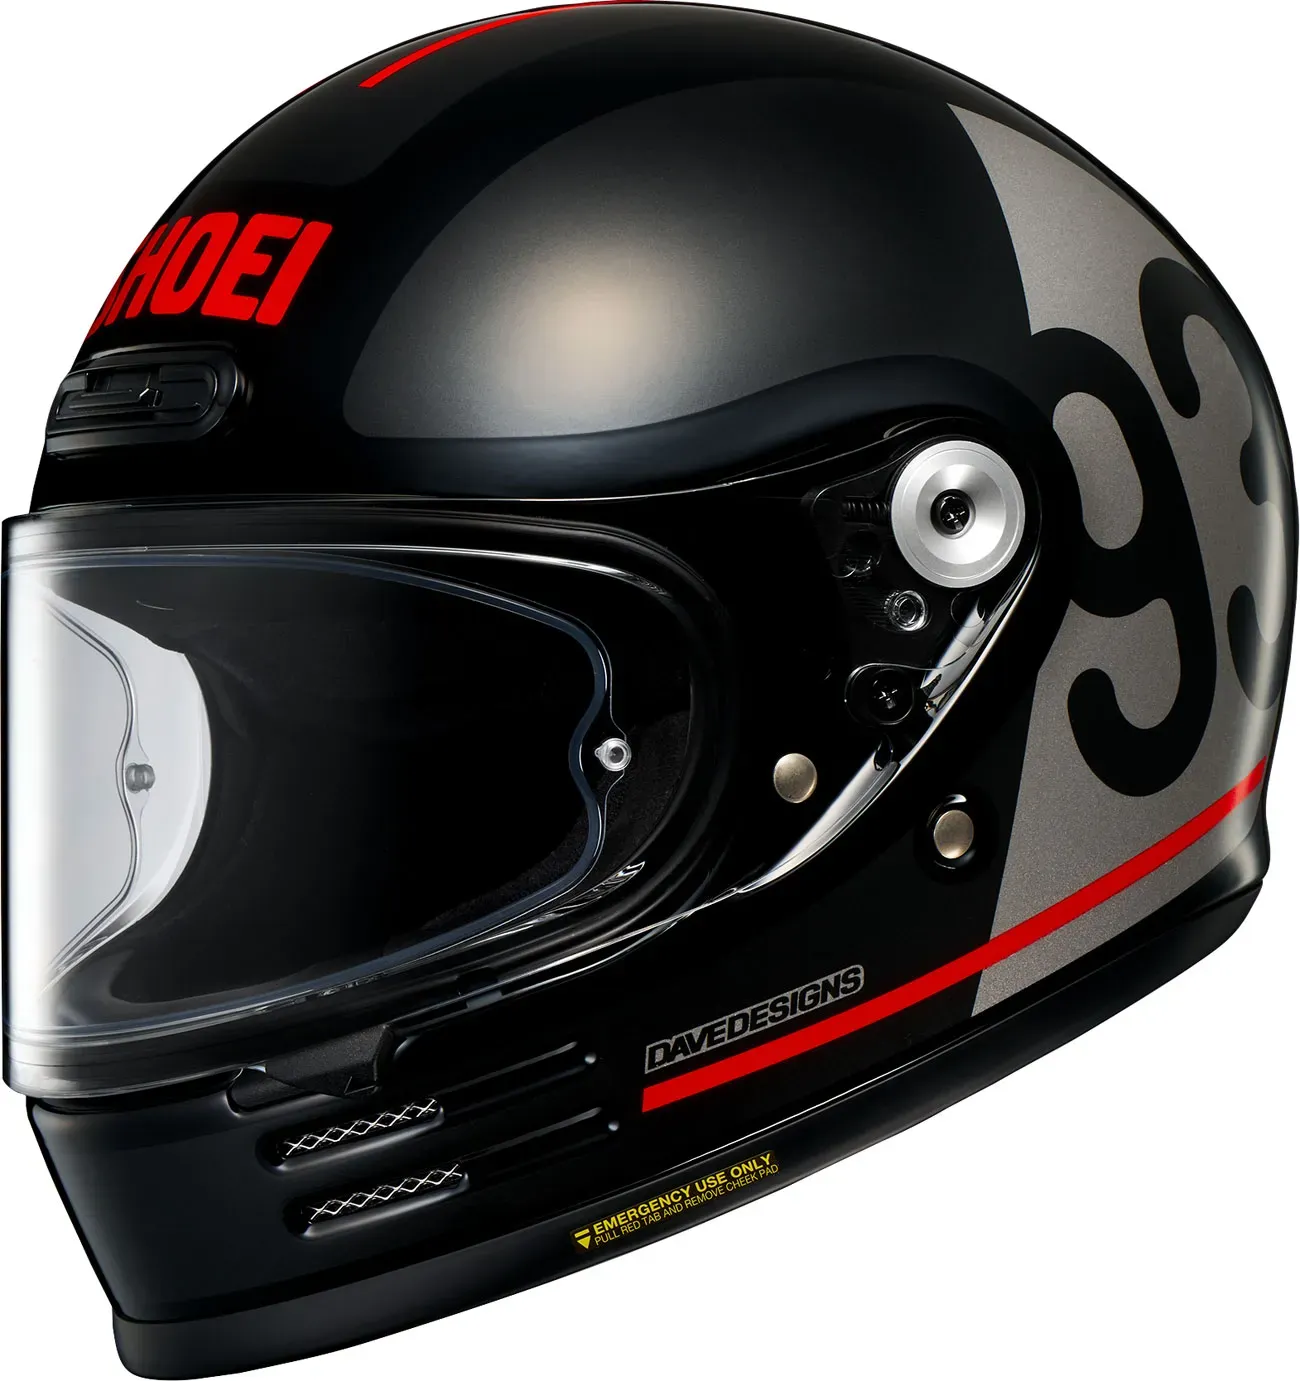 Shoei Glamster-06 MM93 Coll. Classic, casque intégral - Noir/Gris/Rouge - S